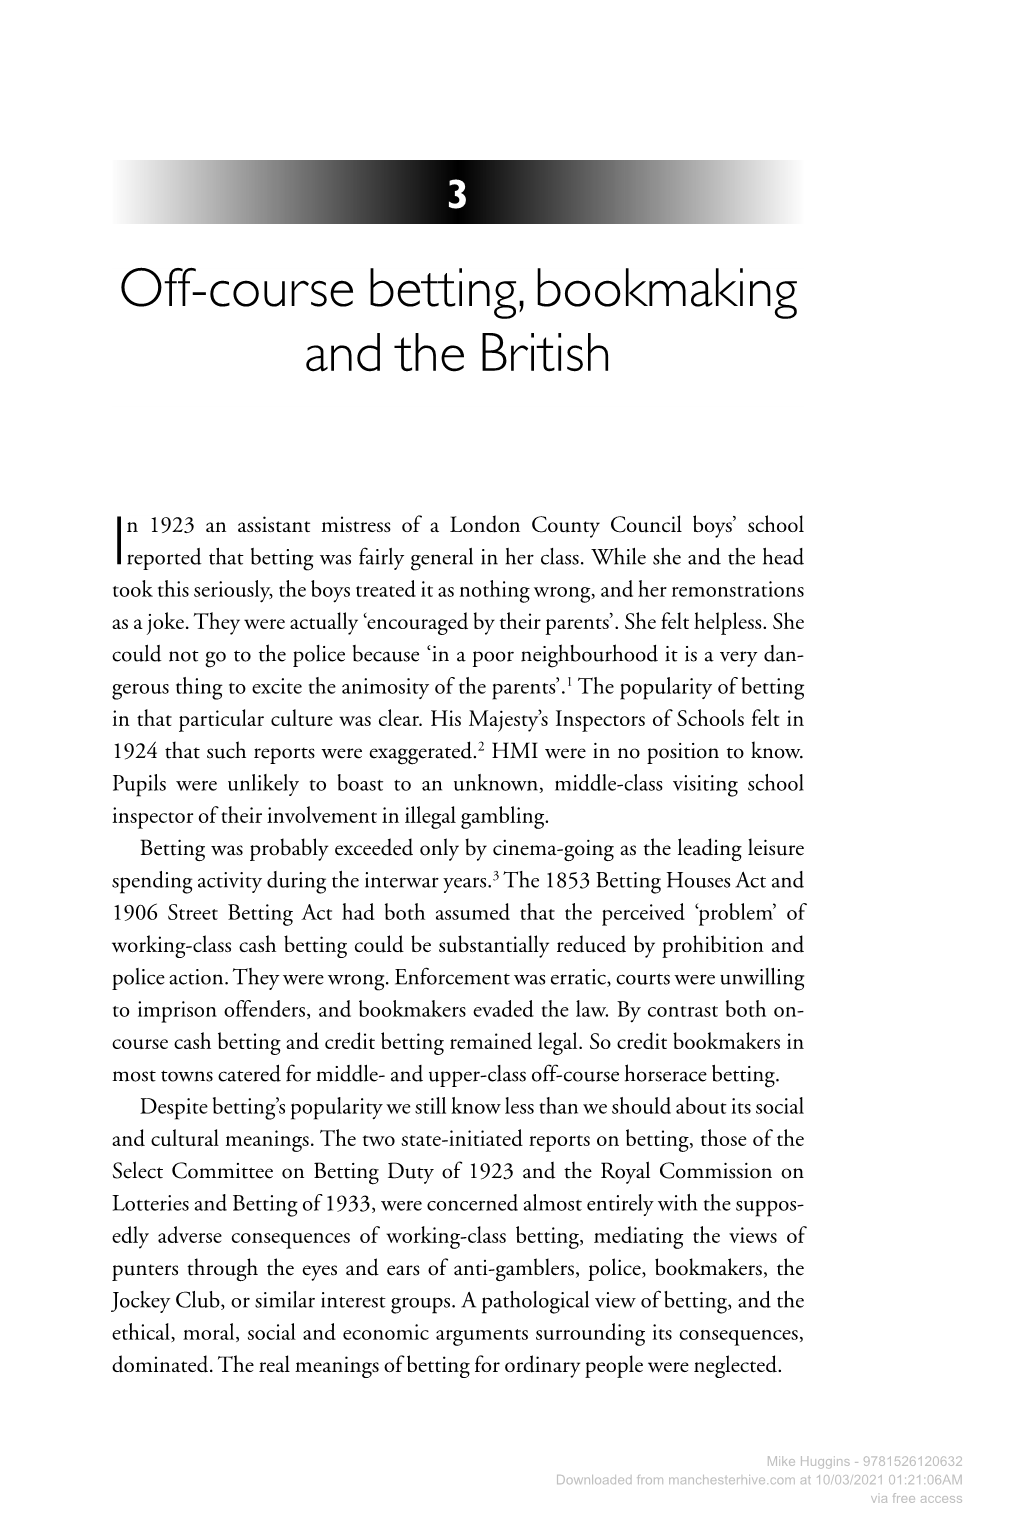 Off-Course Betting, Bookmaking and the British